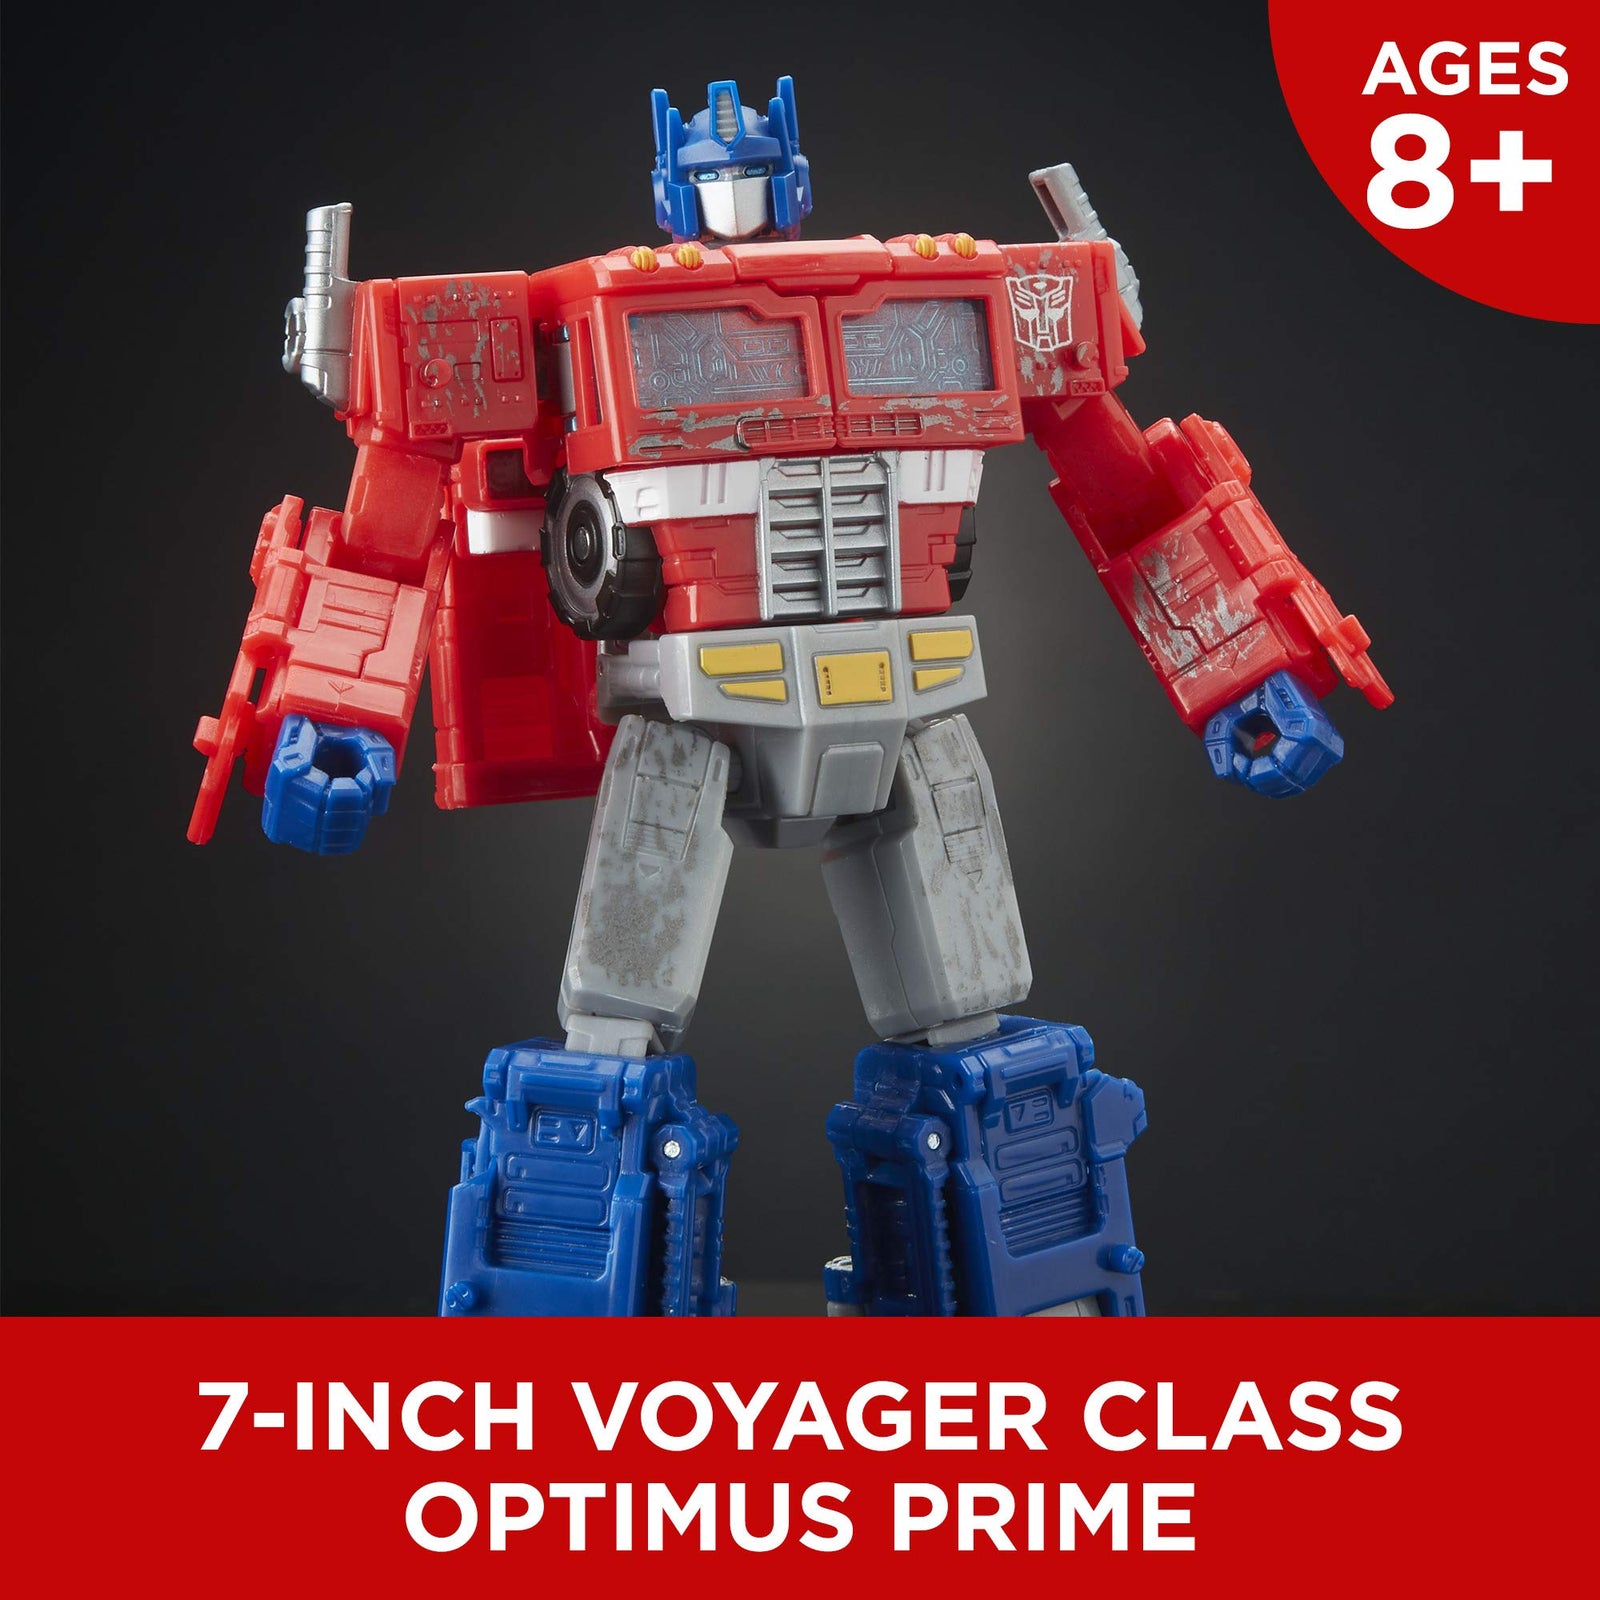 Transformers Generations War for Cybertron: Siege Voyager Class Wfc-S11 Optimus Prime Action Figure